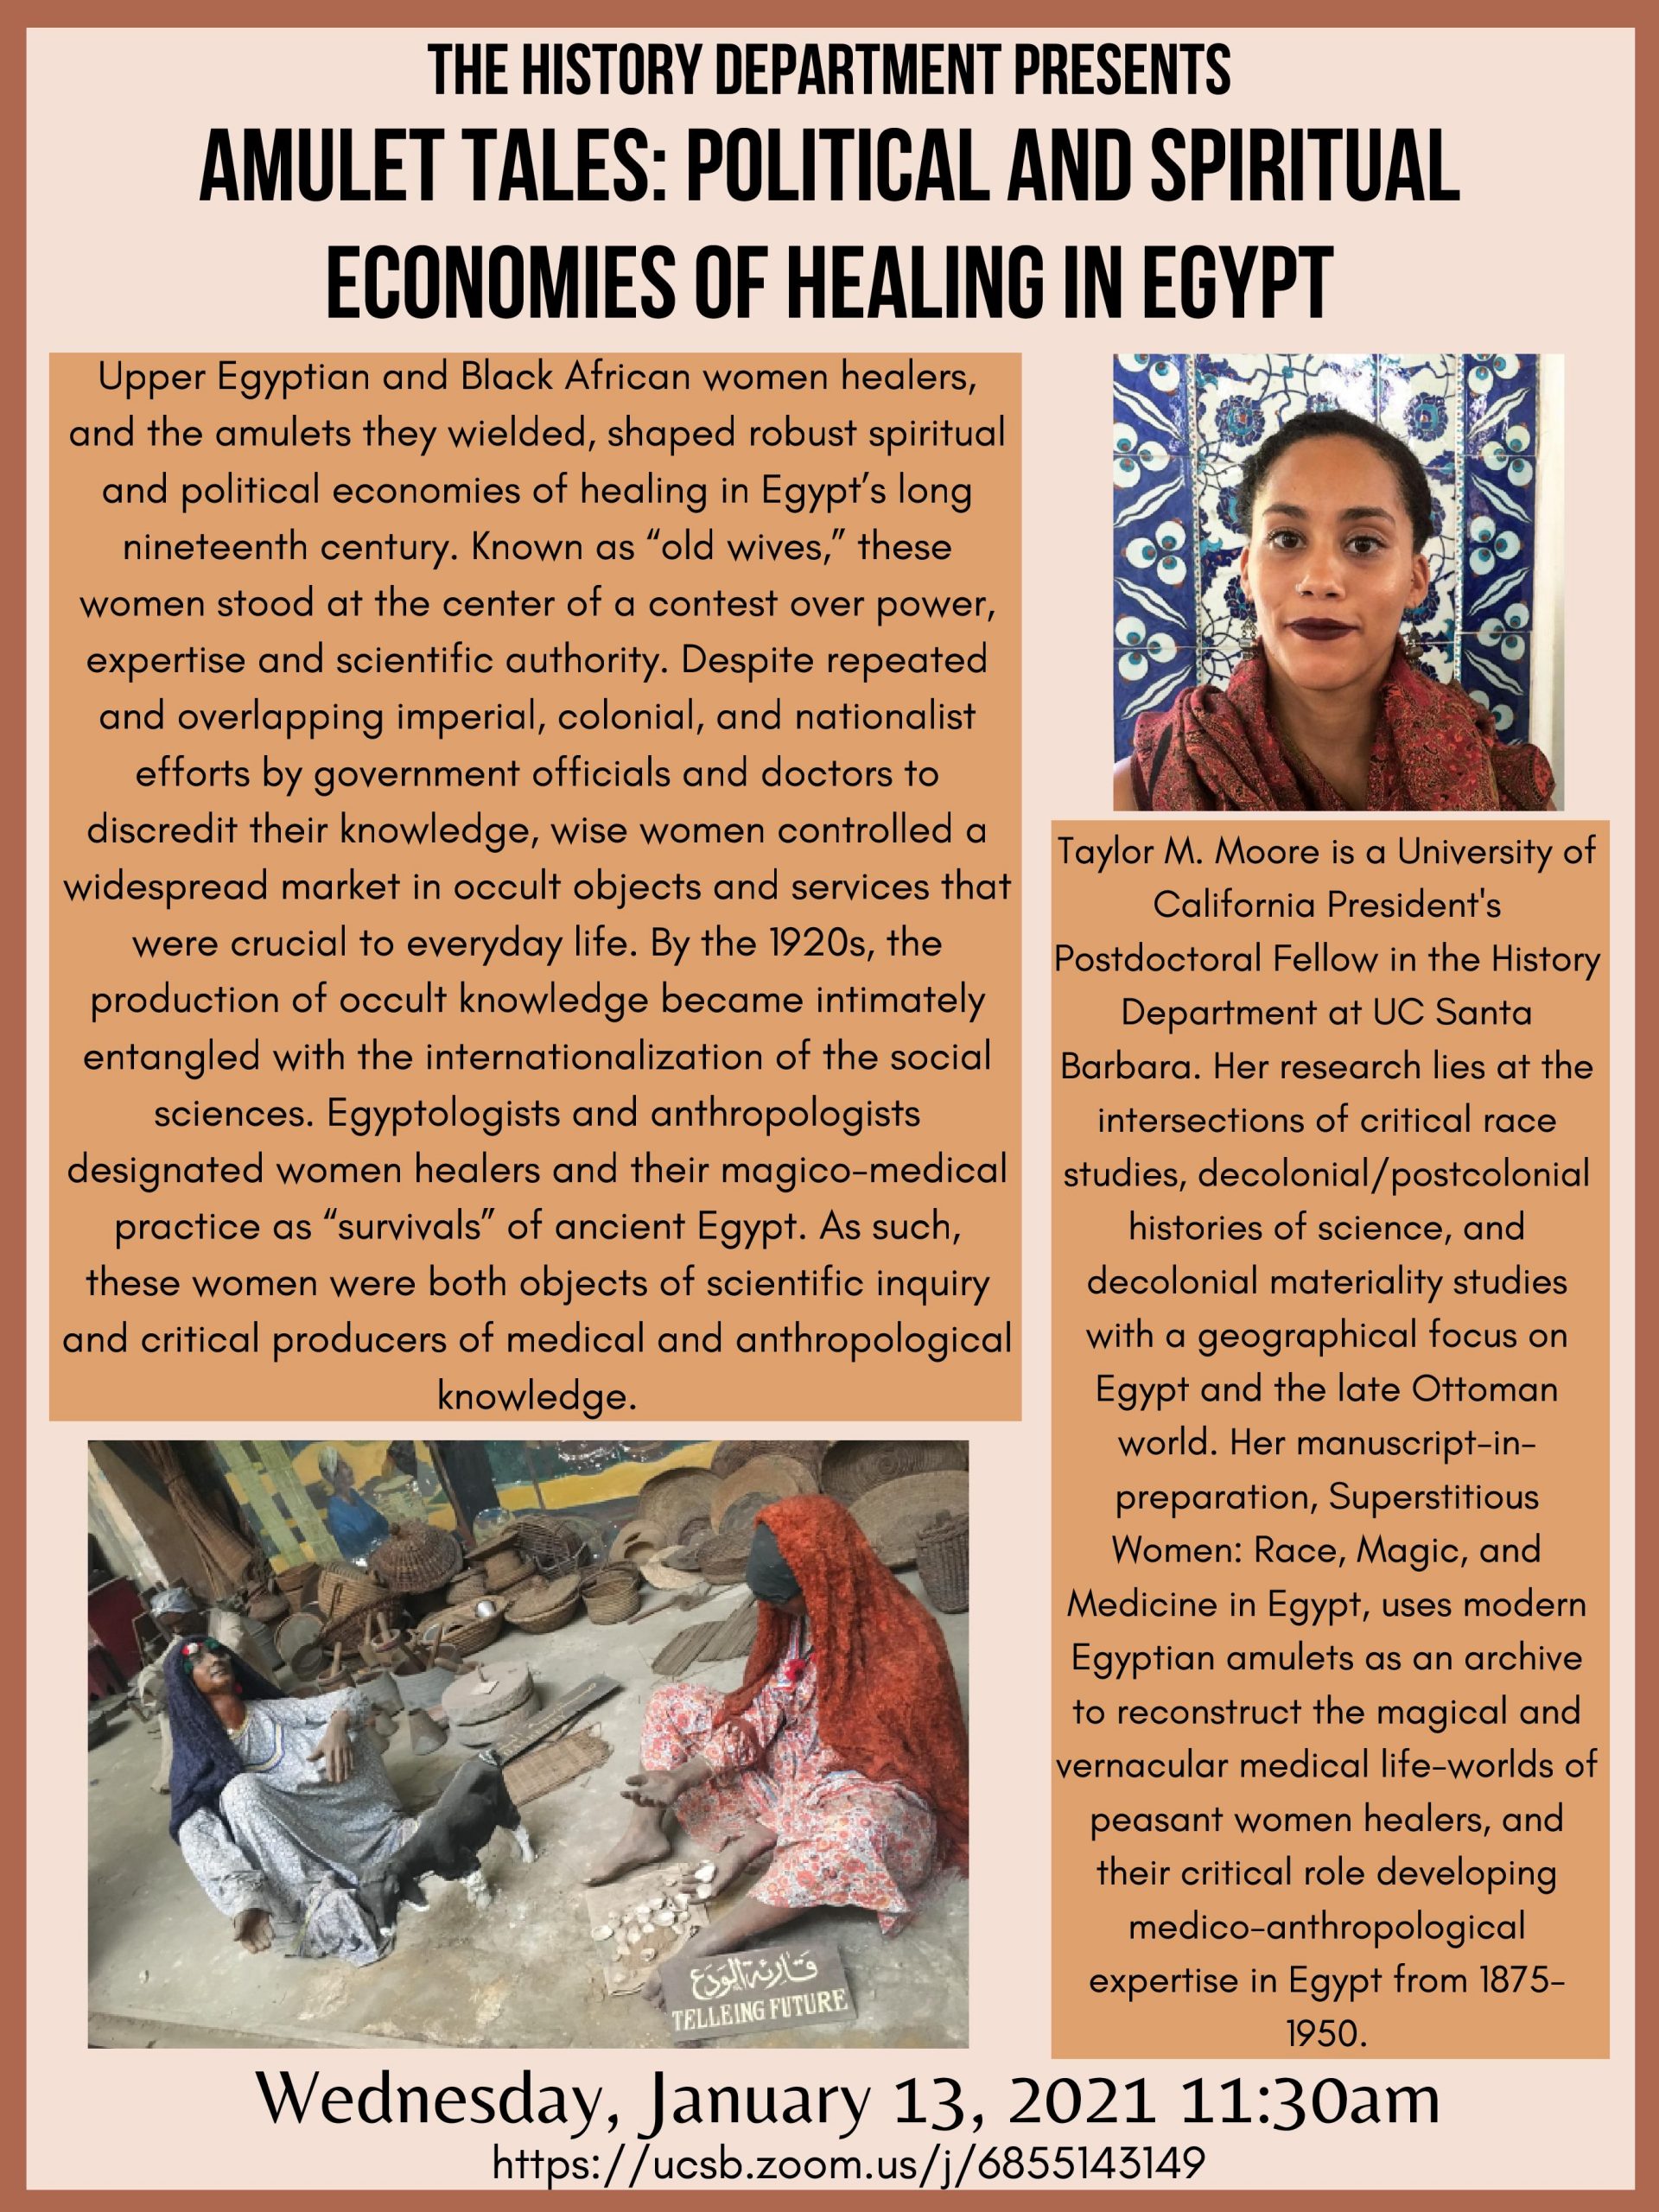 Flyer for Zoom talk "Amulet Tales: Political and Spiritual Economies of Healing in Egypt on 1/13/21 at 11:30AM